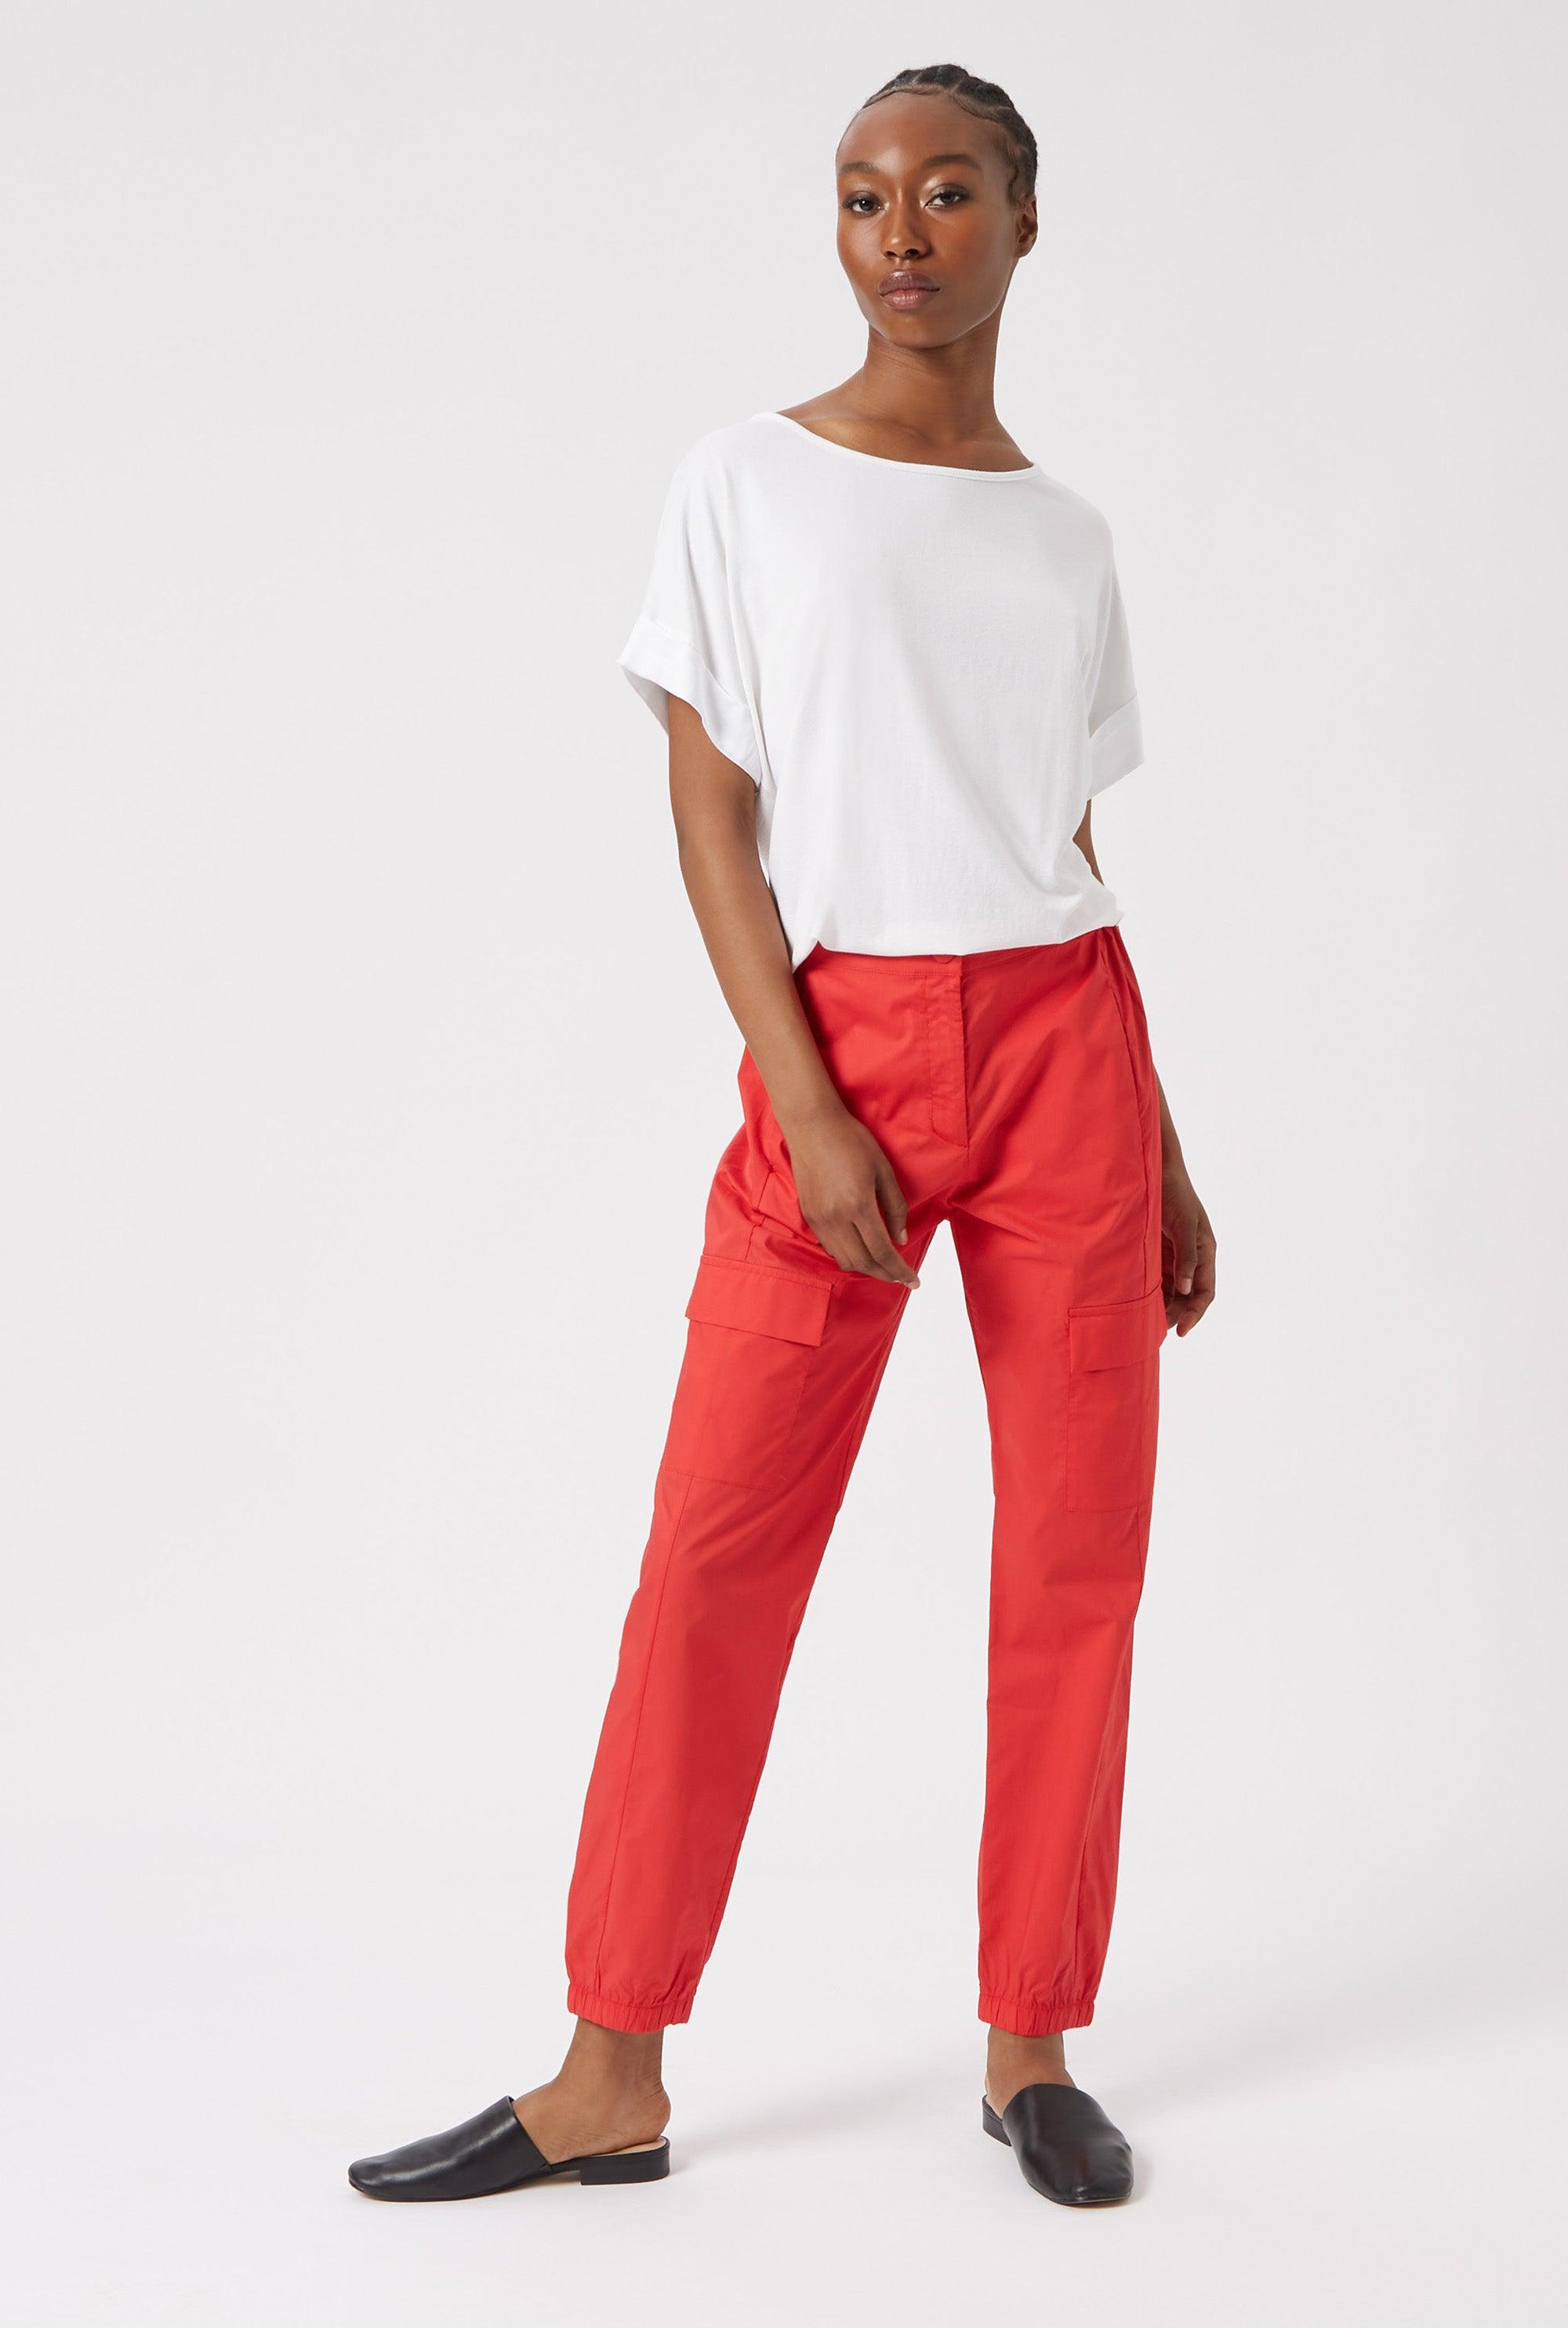 Red Belted Trousers  Red Tapered Trousers  Office Chic  Lulus